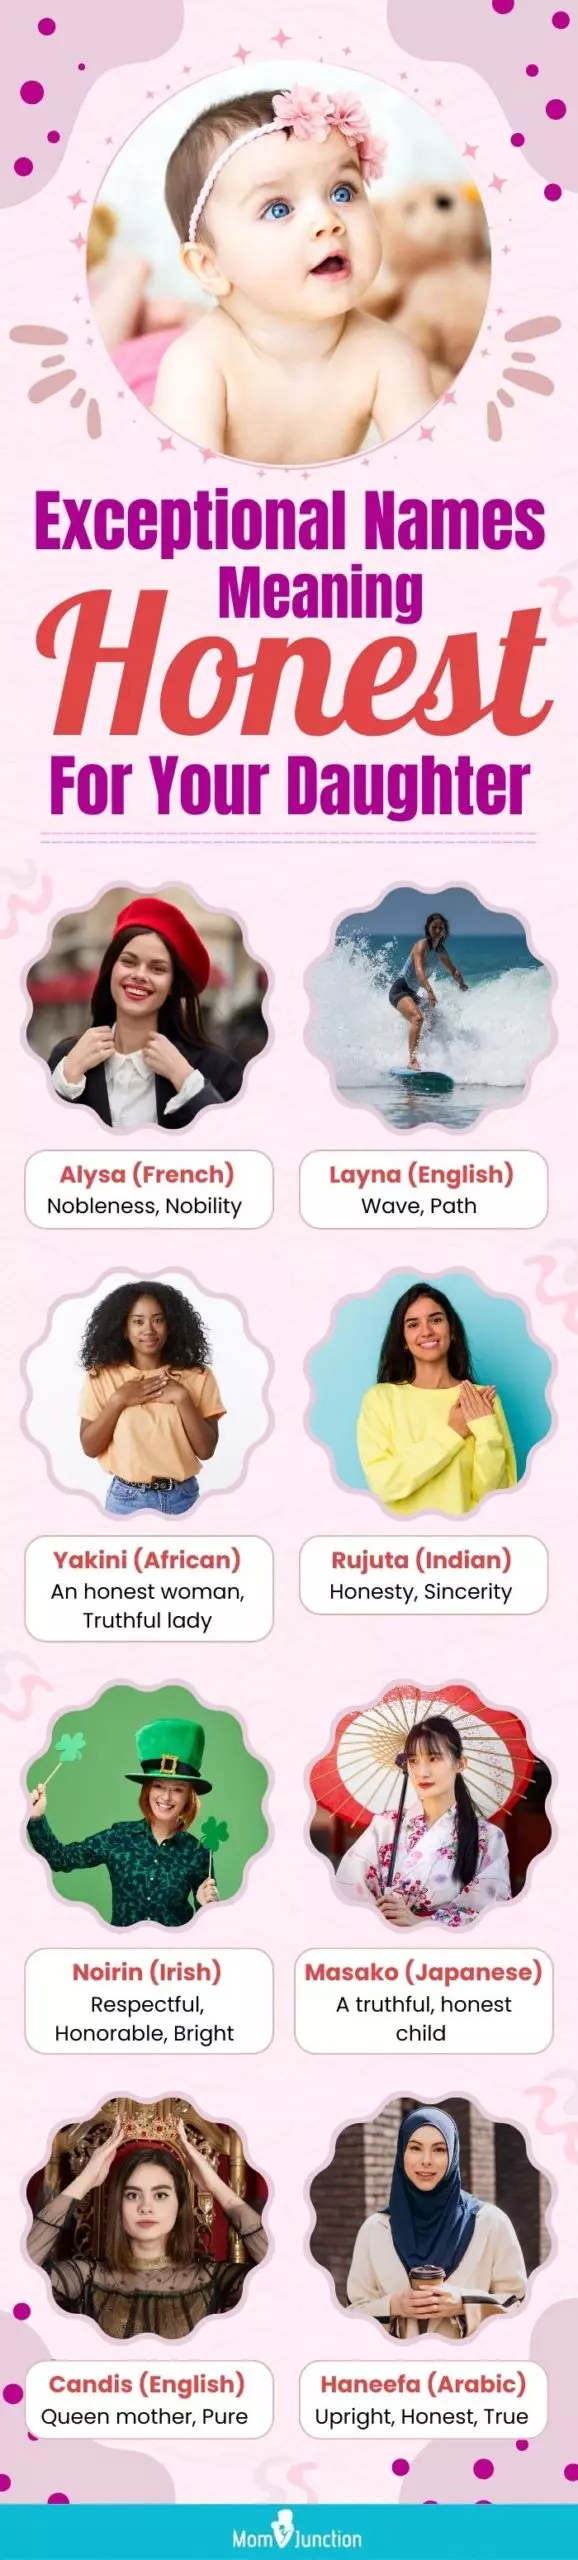 exceptional names meaning honest for your daughter (infographic)